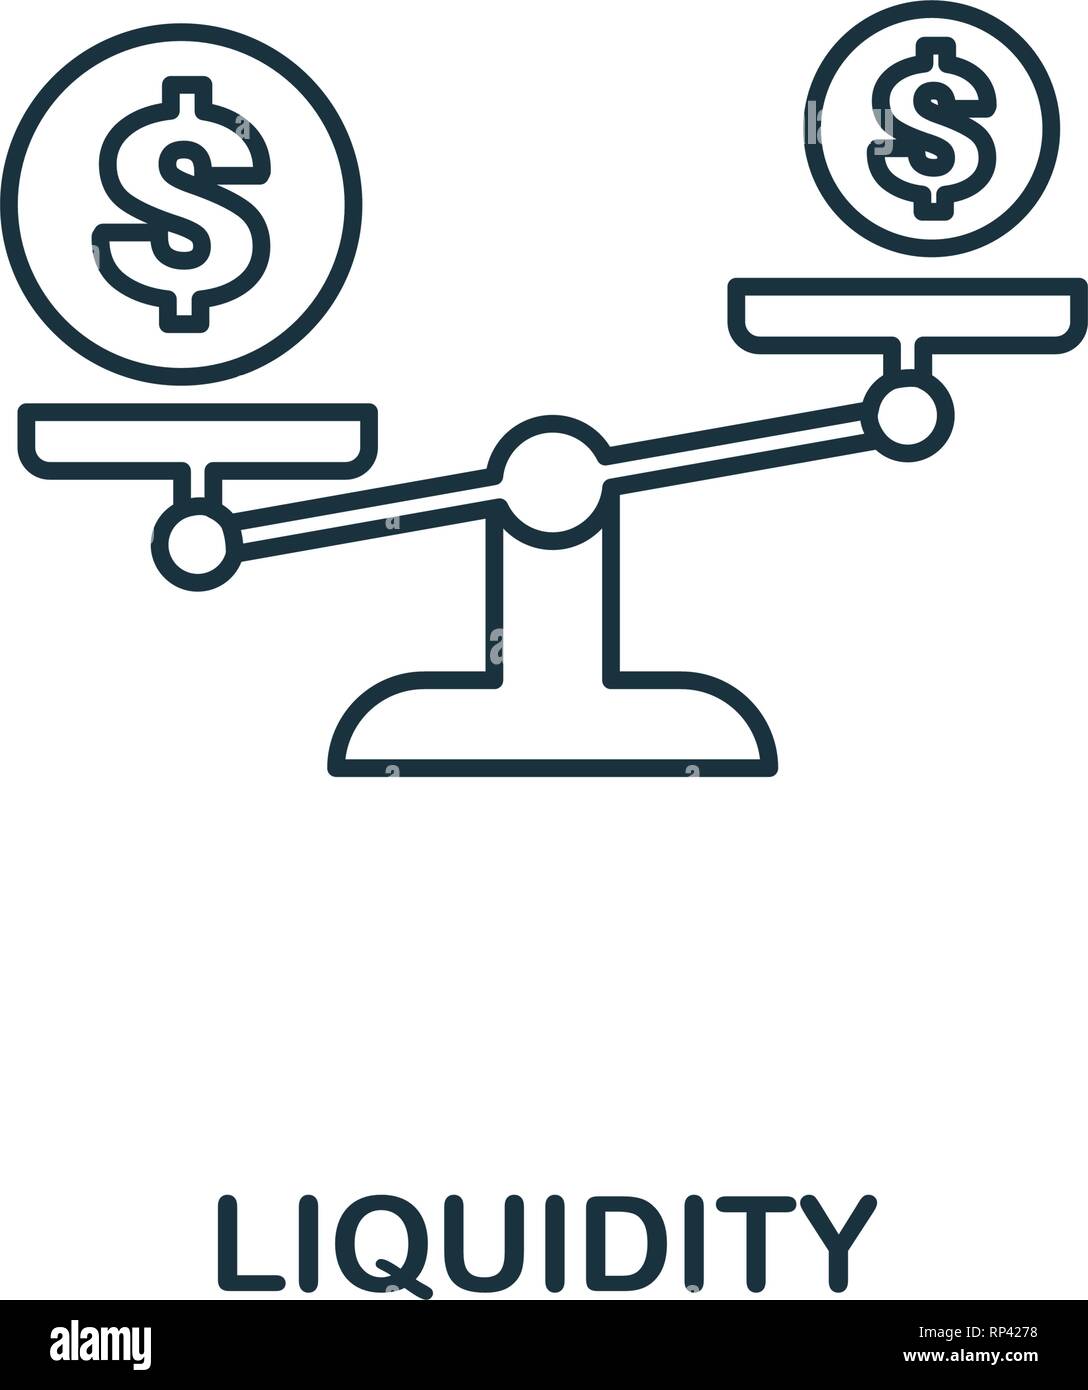 Liquidity outline icon. Thin line element from crowdfunding icons collection. UI and UX. Pixel perfect liquidity icon for web design, apps, software Stock Vector